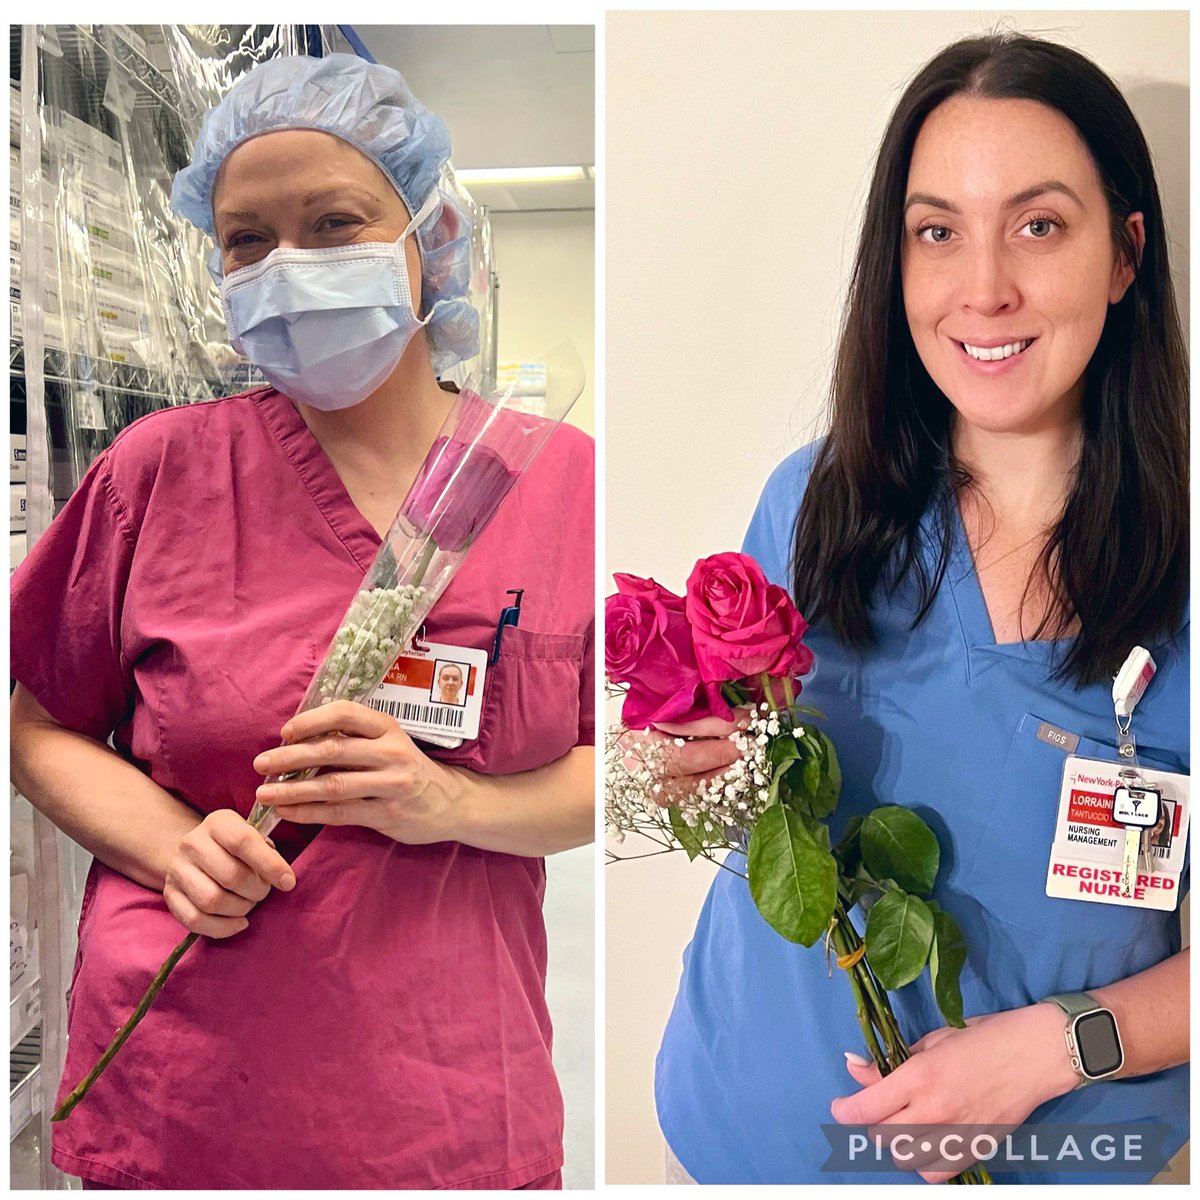 Recognizing 2 newly CNOR certified RNs! Natalia, OR RN & Lorraine OR CNM!! #milestonemoments #leadingbyexample #journey2excellence 🌸🥳 @Mary_Cassai @alanmlevin @nas9096 @cnornurse